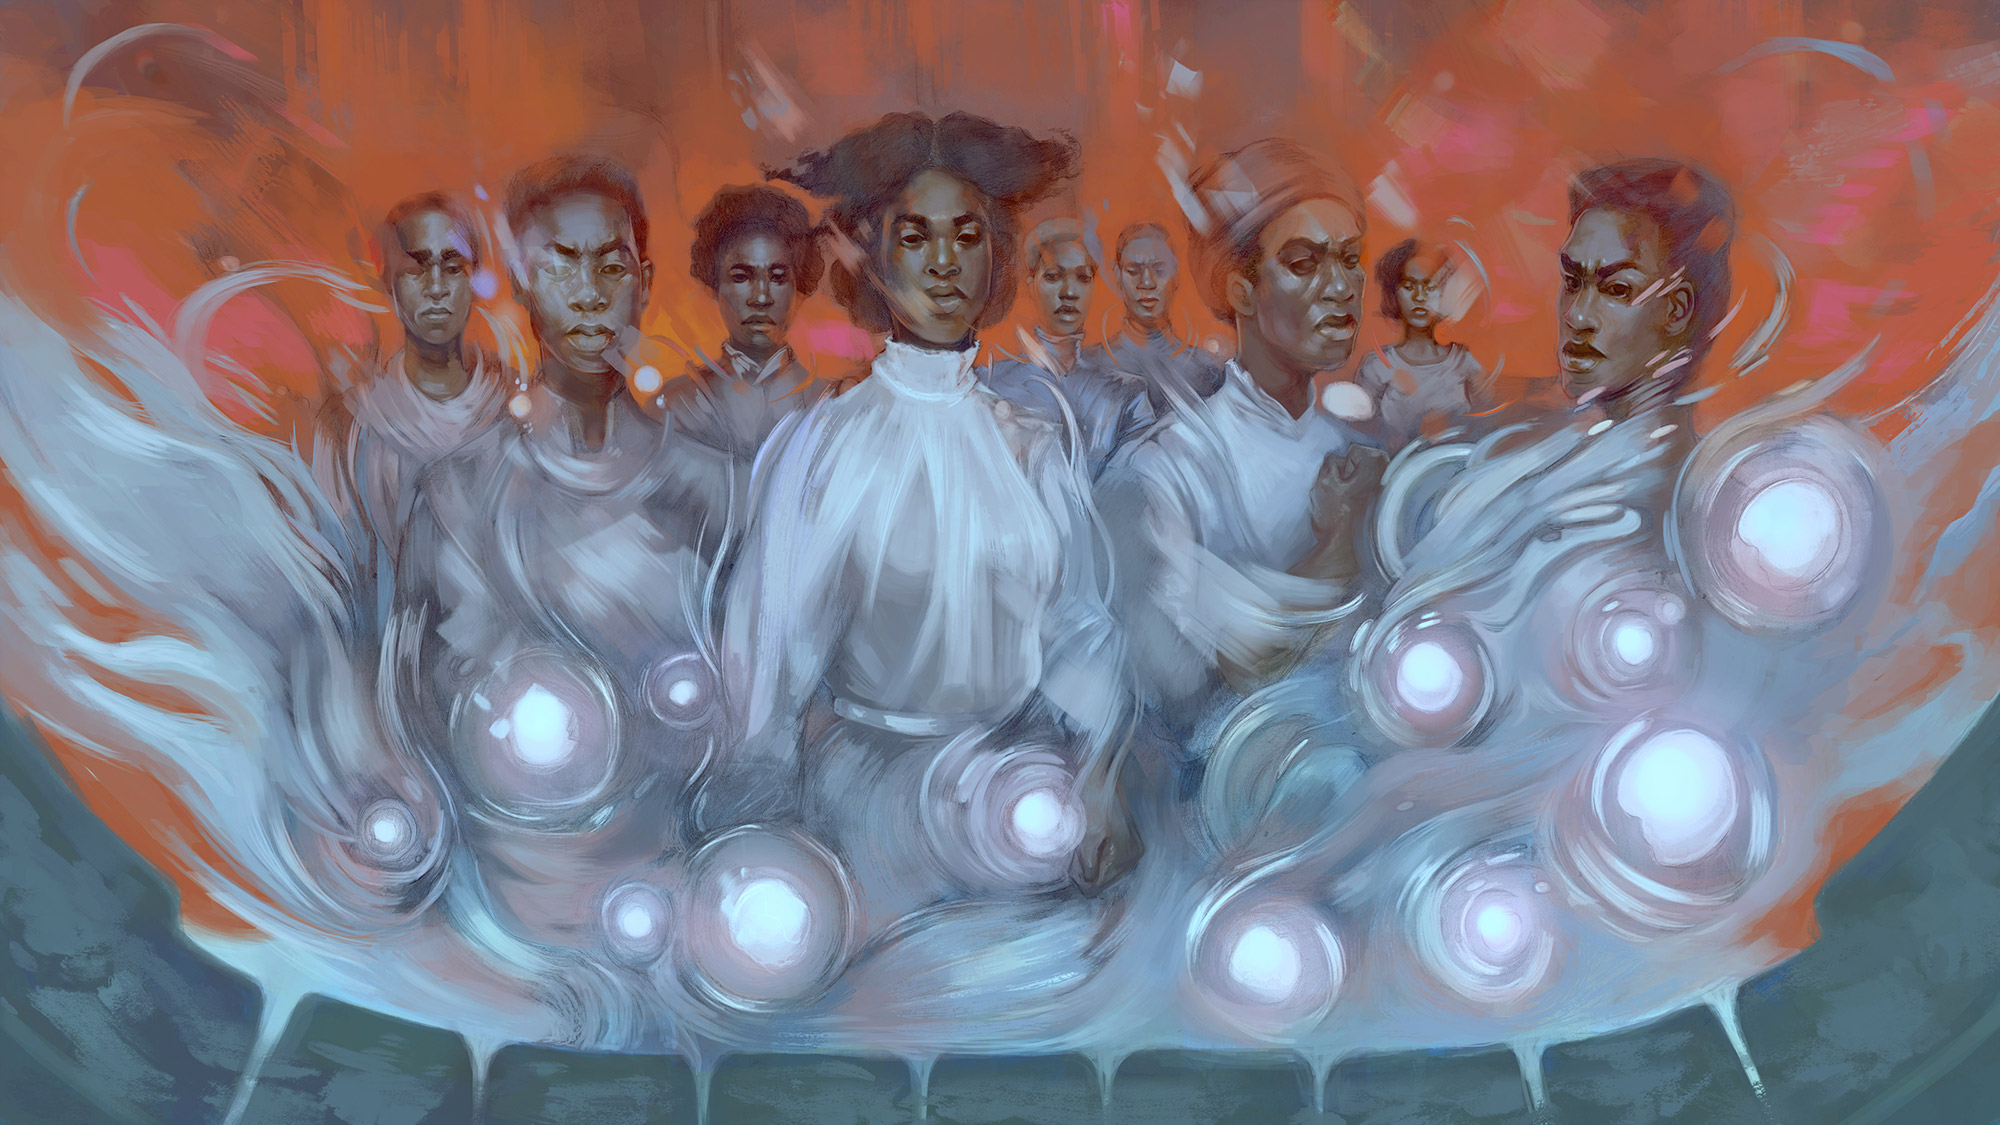 Nine ethereal Black people stand in defiance, surrounded by creepy dentures and luminous orbs.